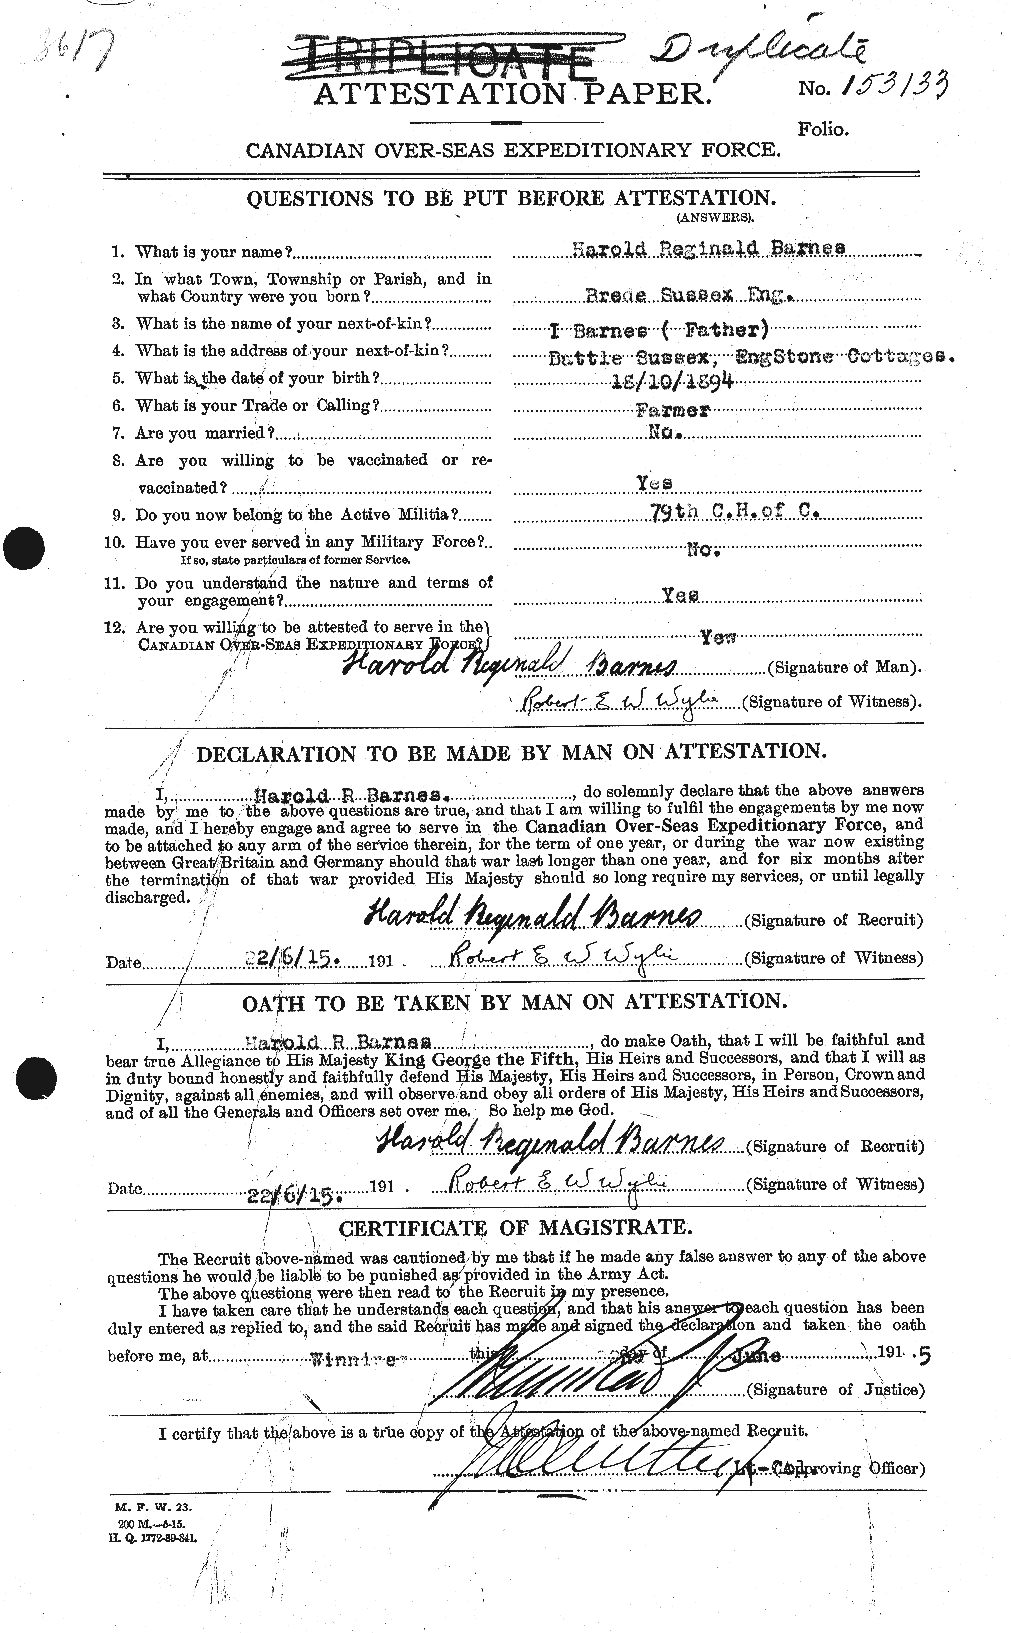 Personnel Records of the First World War - CEF 222489a